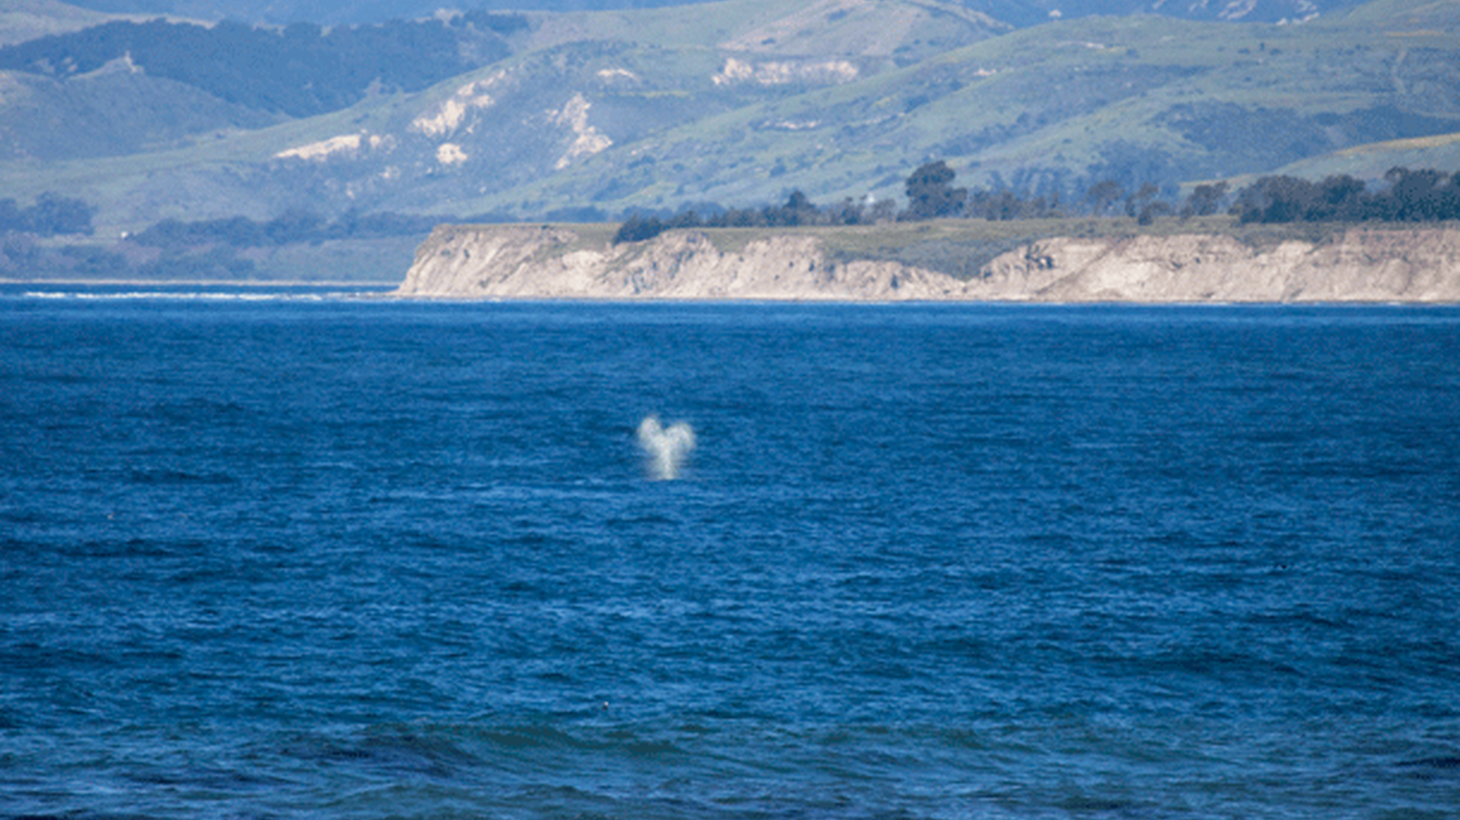 Surveying the northbound migration of Gray whales (Eschrichtius robustus) through the nearshore of the Santa Barbara Channel from Counter Point, Coal Oil Point Reserve, Goleta, California, USA